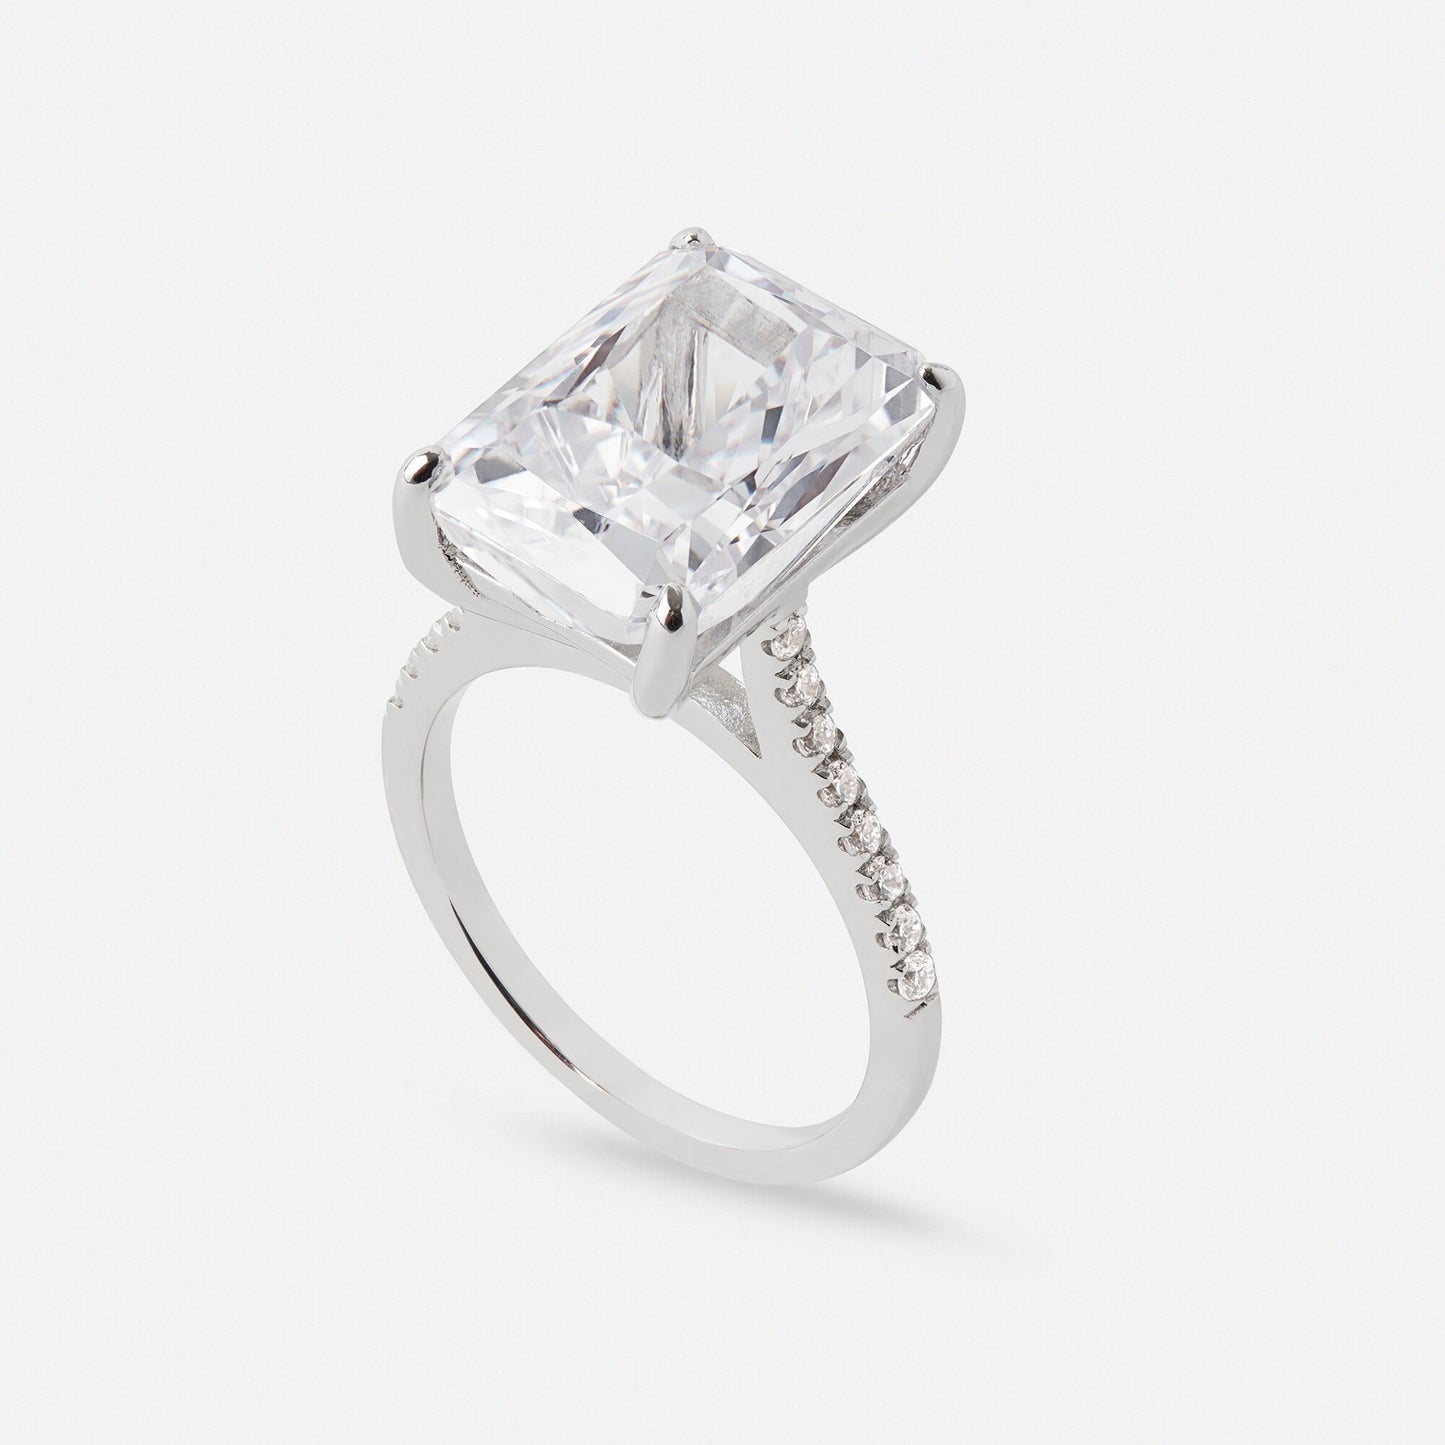 8.7ct Radiant cut Moissanite solitaire ring in solid gold or platinum - engagement ring